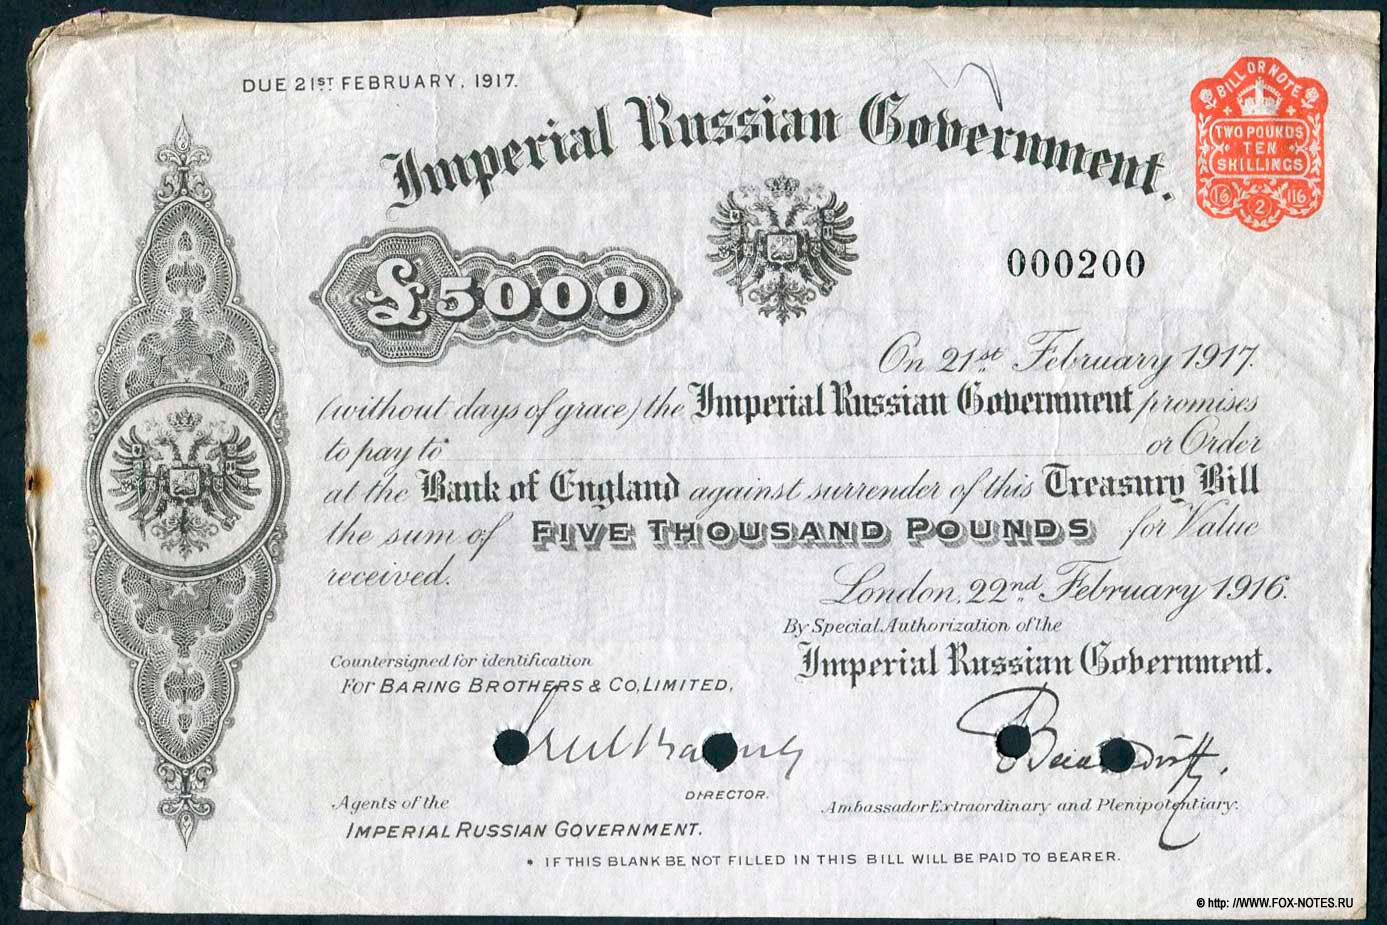 Imperial Russian Government 5000 Pounds 22 February 1916 - 21 February 1917.Cecil Baring